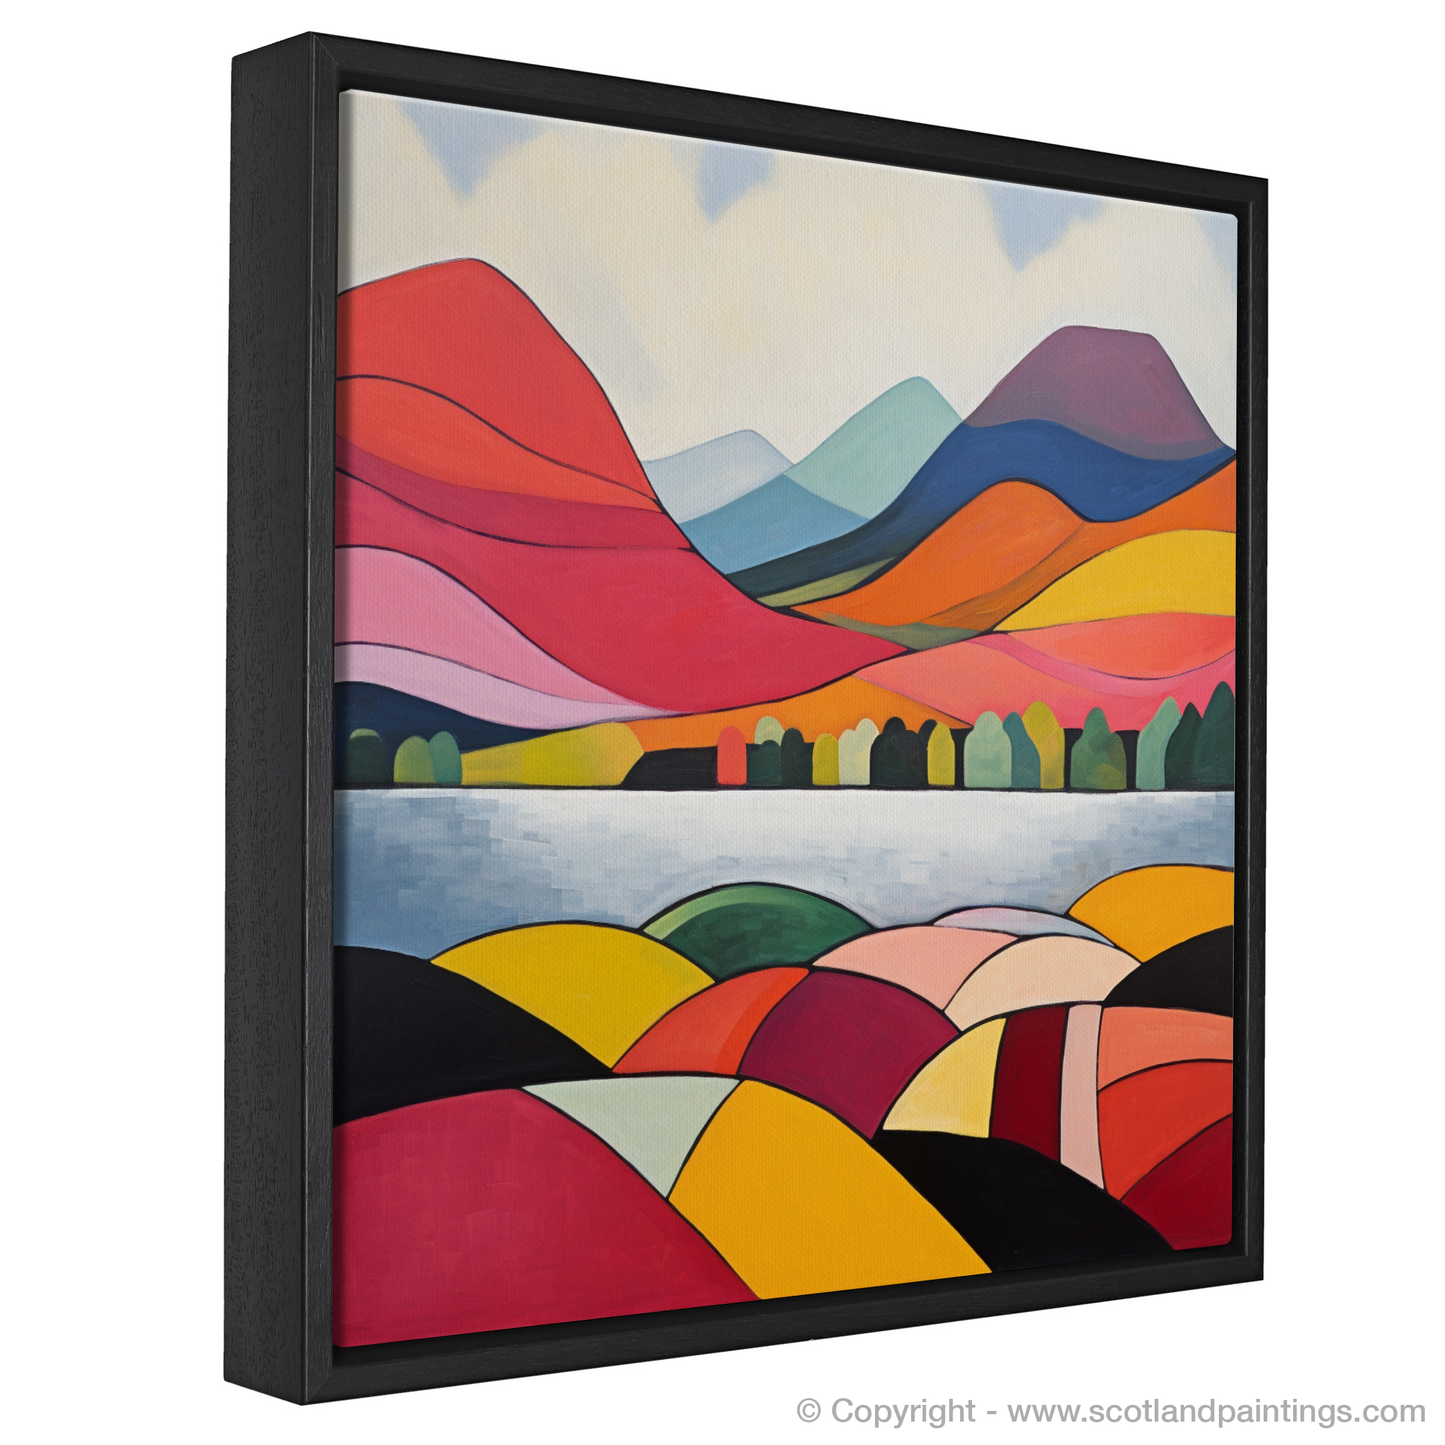 Painting and Art Print of Loch Lochy, Highlands in summer entitled "Abstract Majesty of Loch Lochy: A Scottish Summer Tapestry".